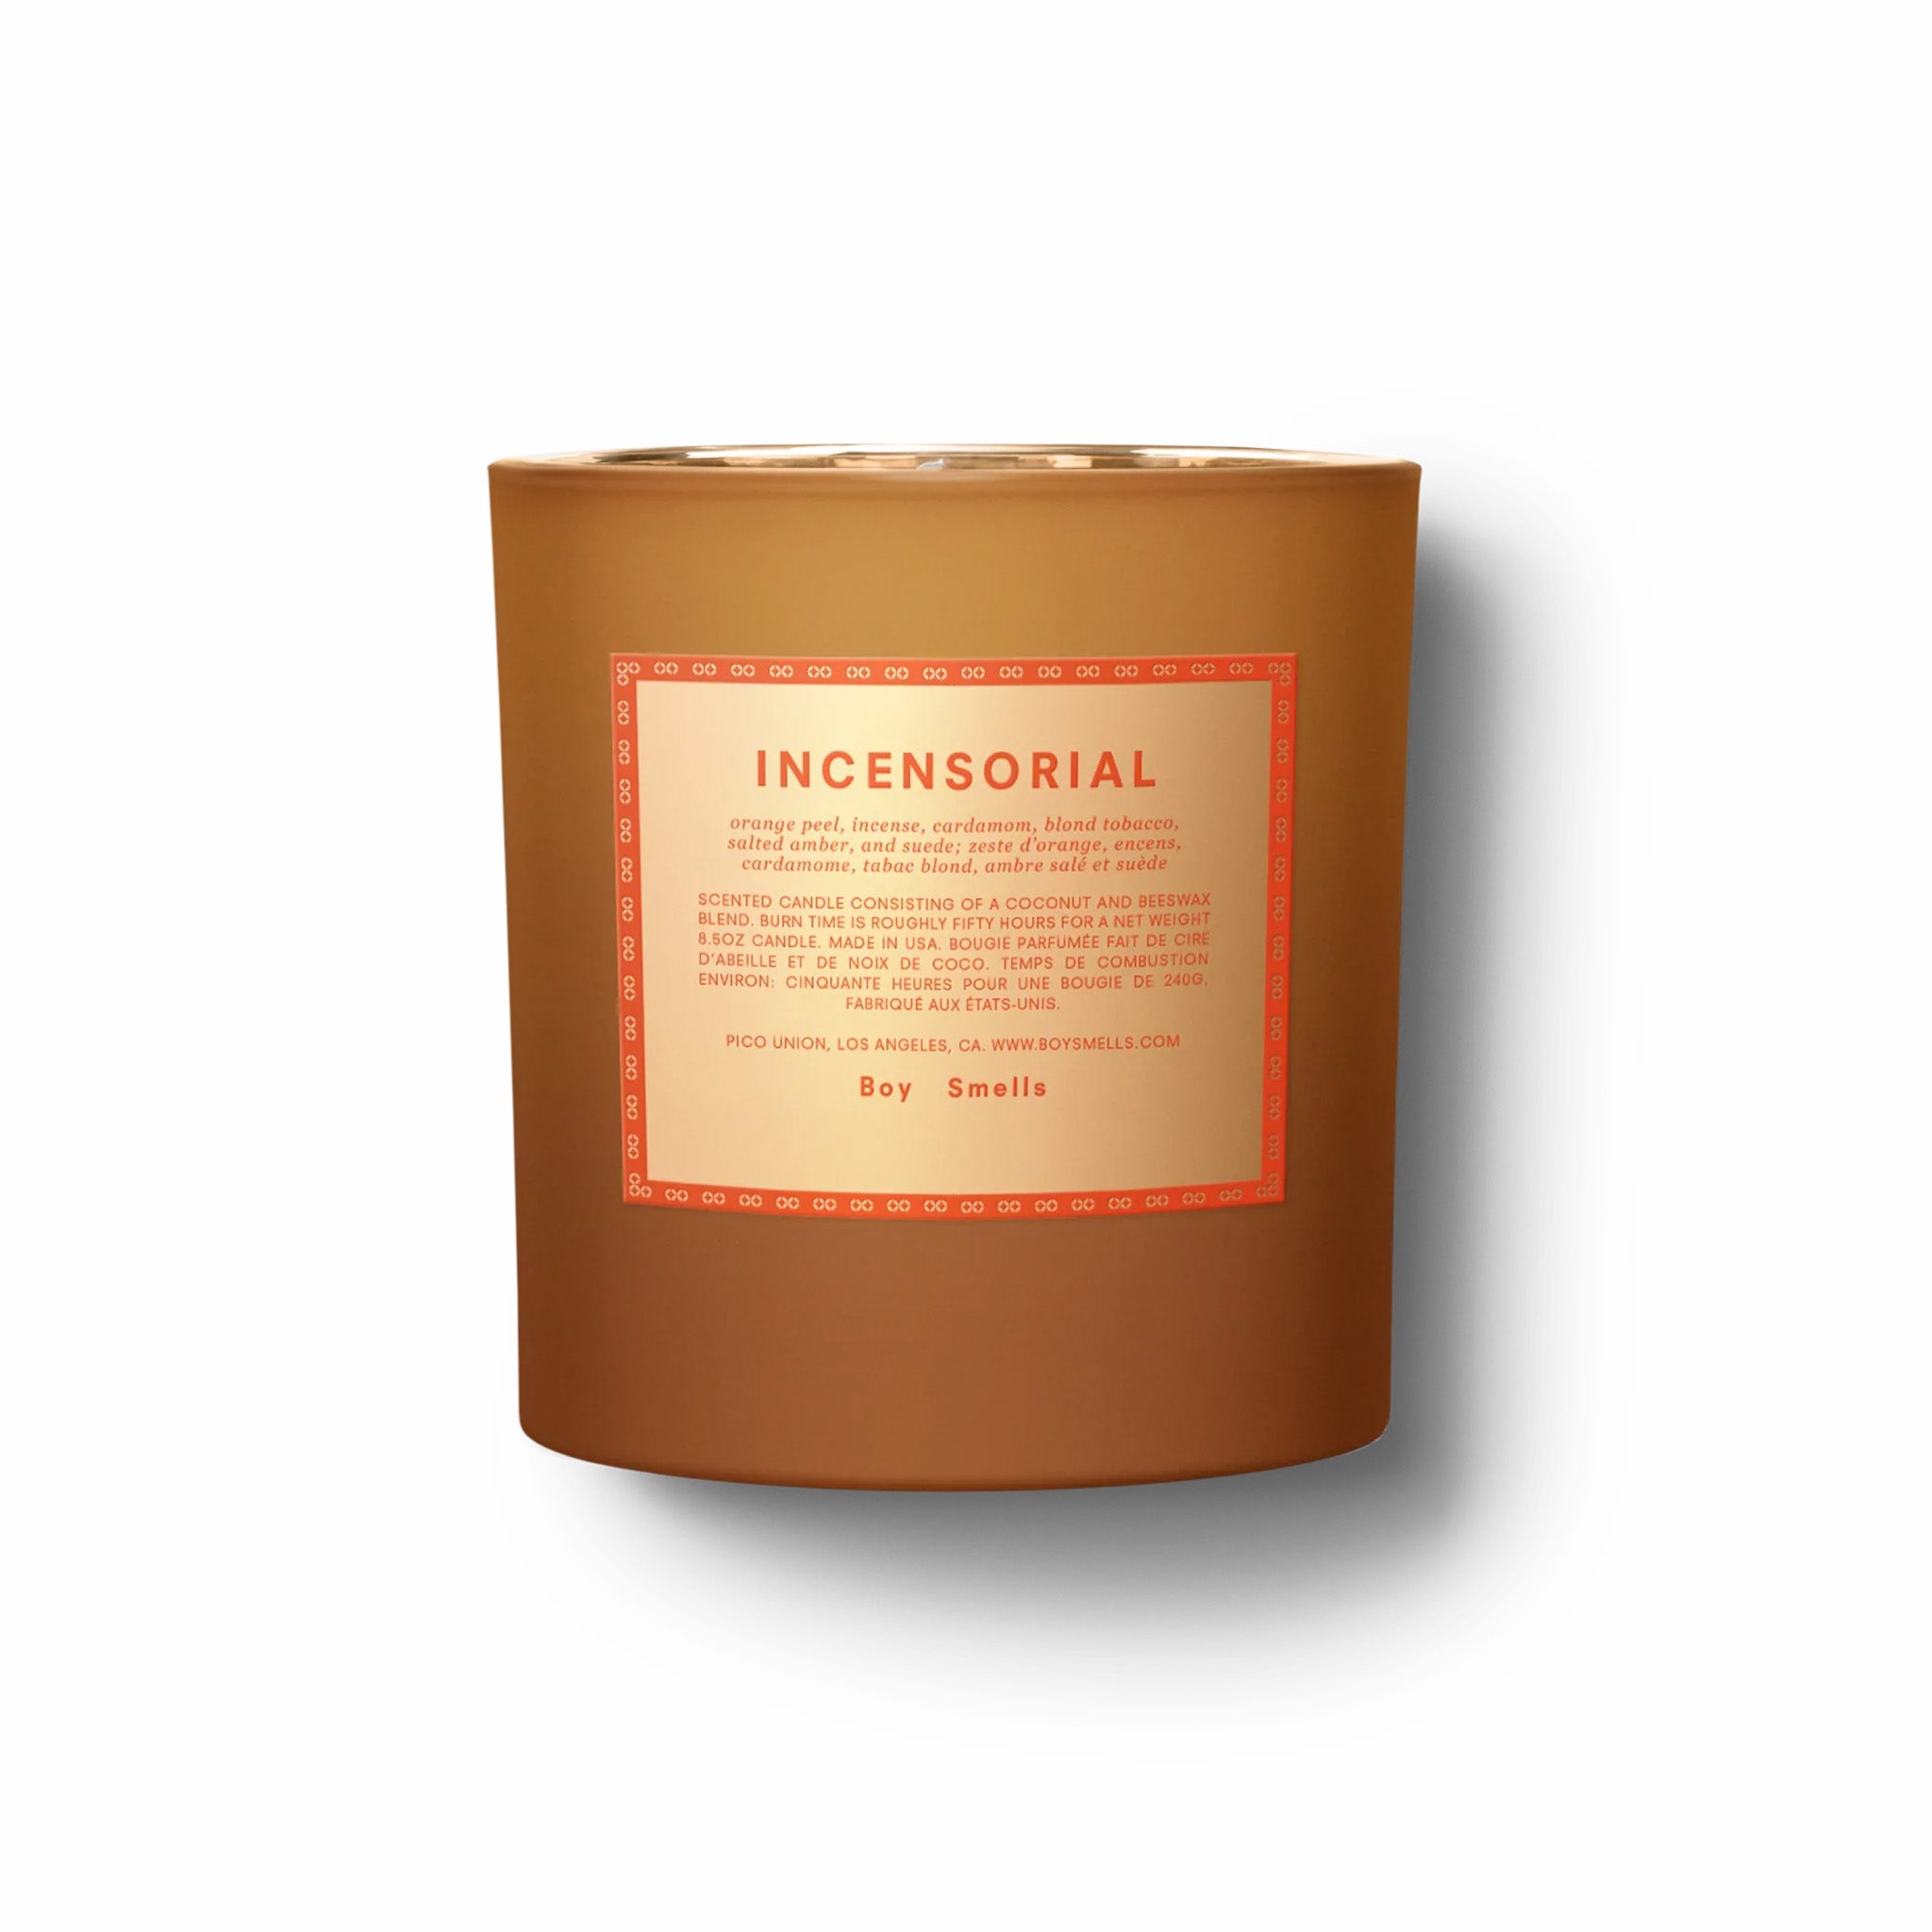 Boy Smells Incensorial Candle - August Shop